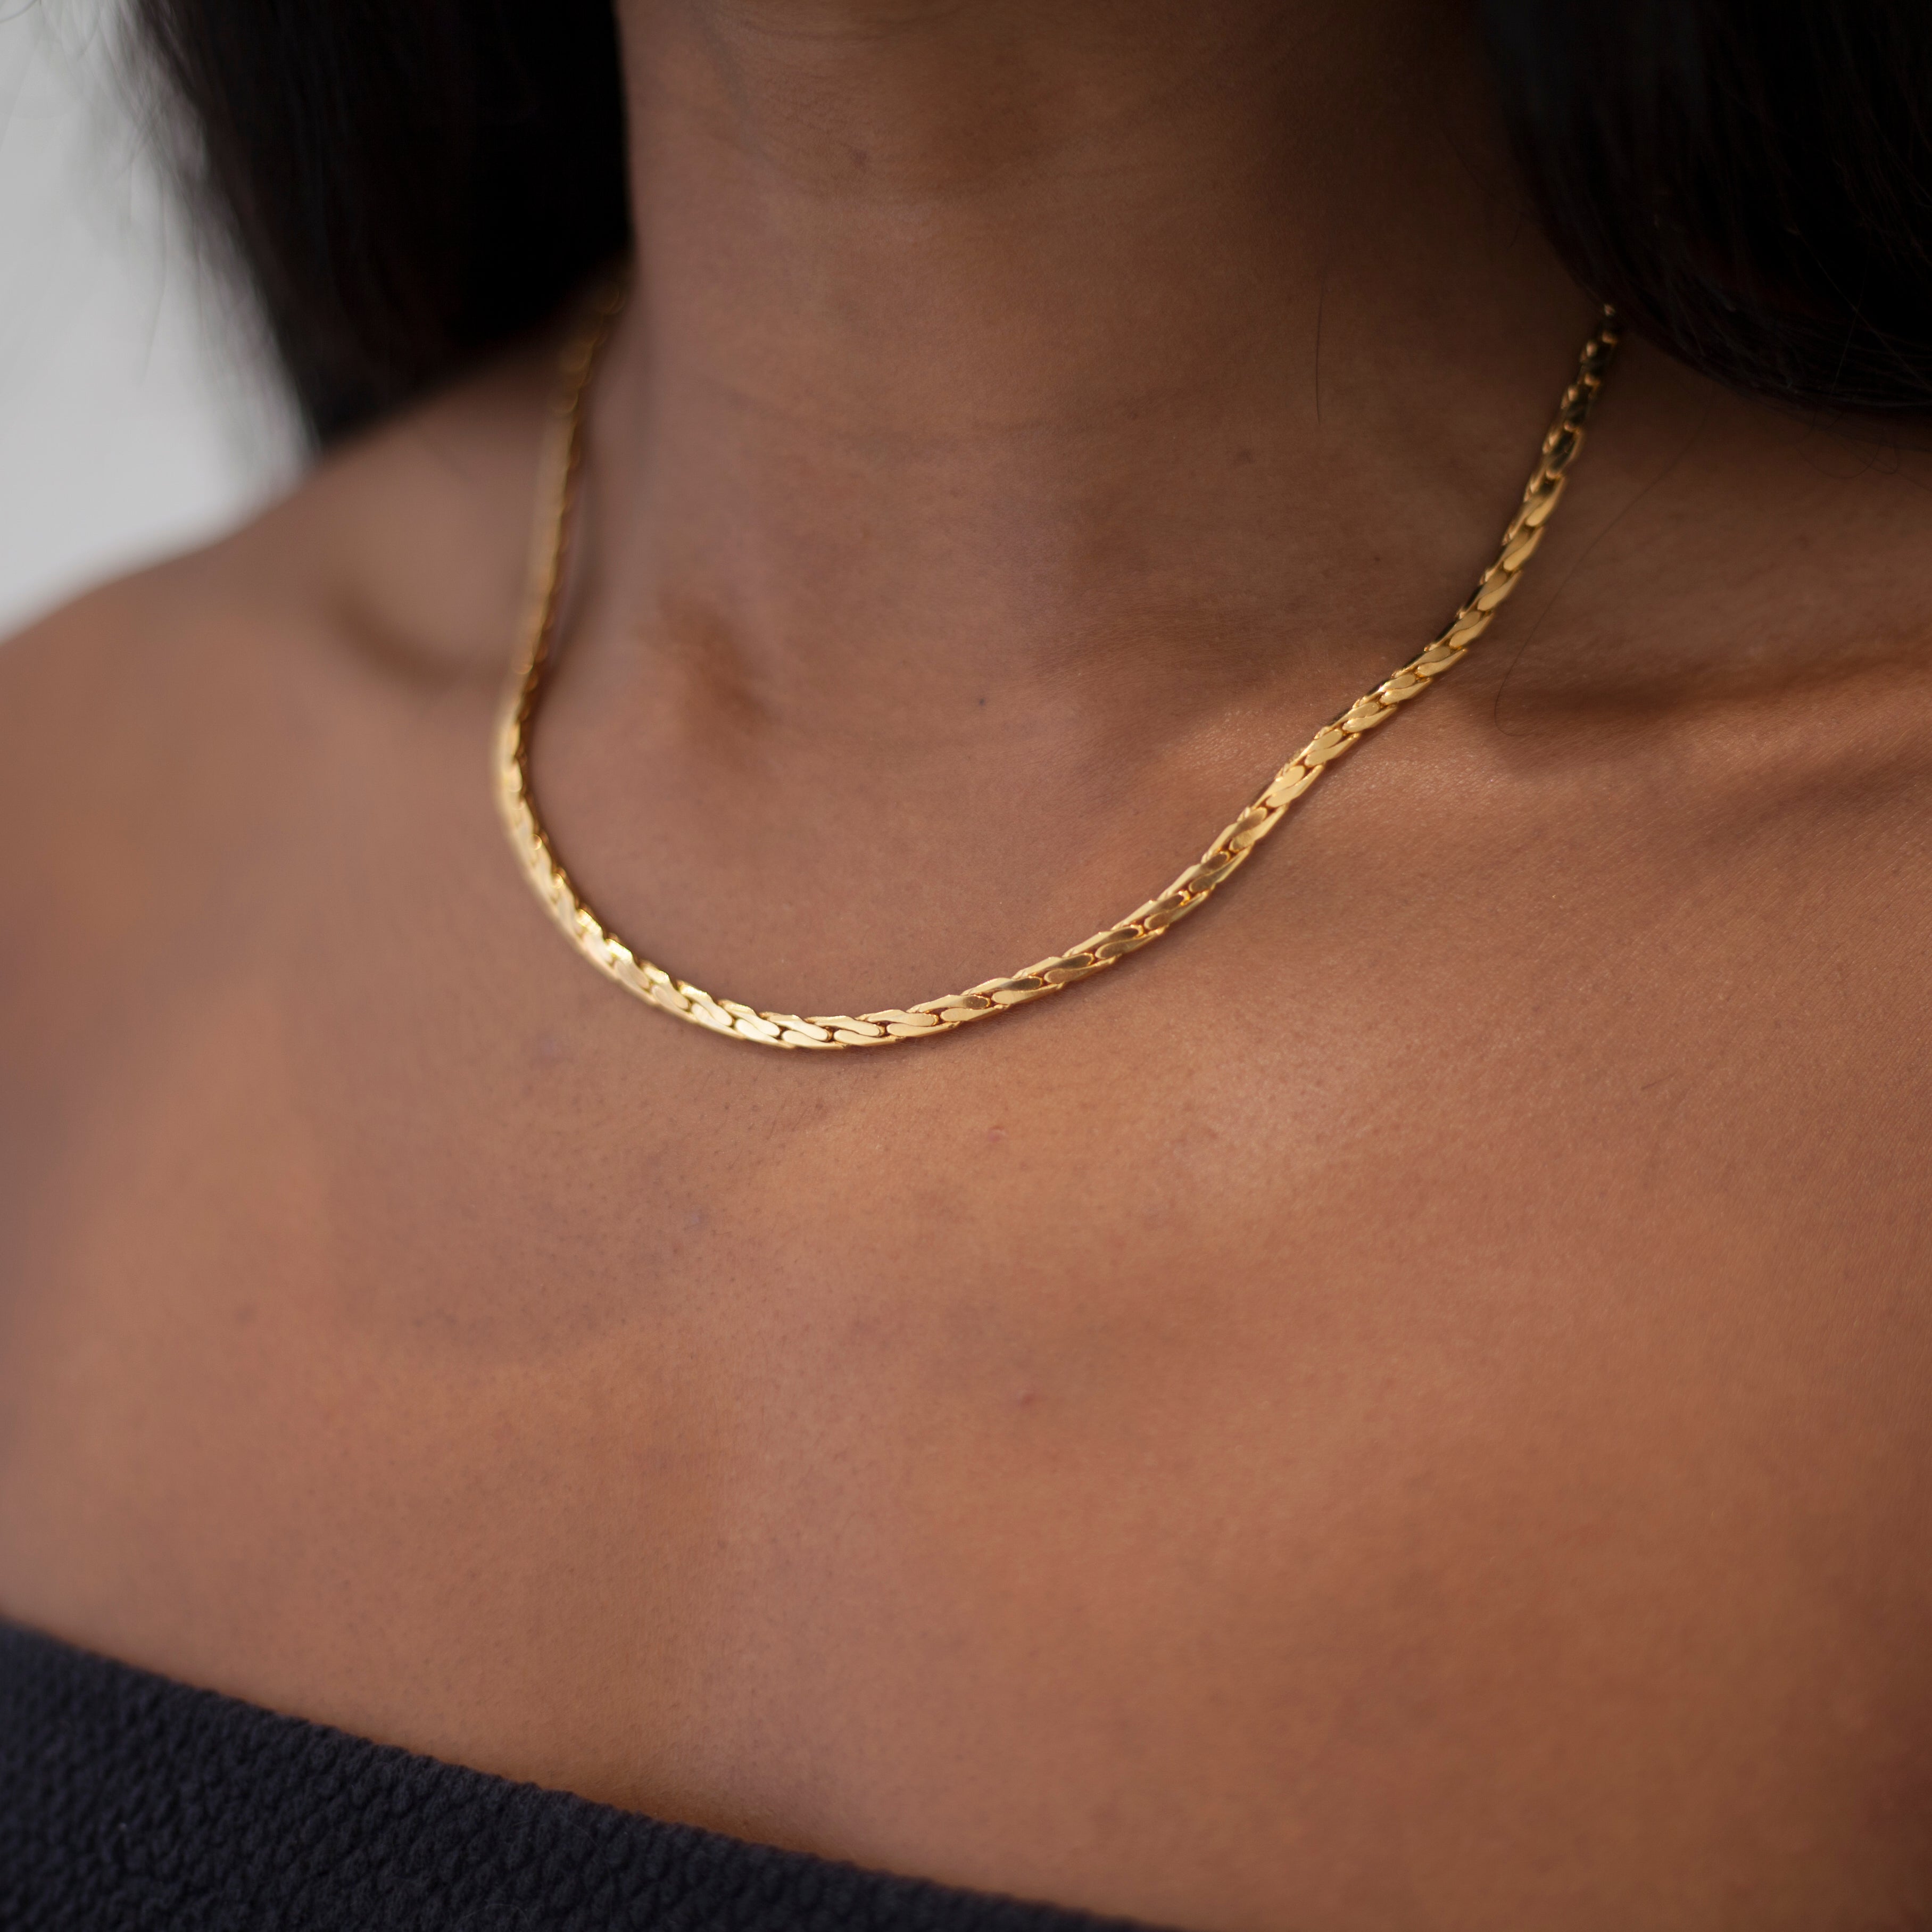 Gold tight link chain necklace on model